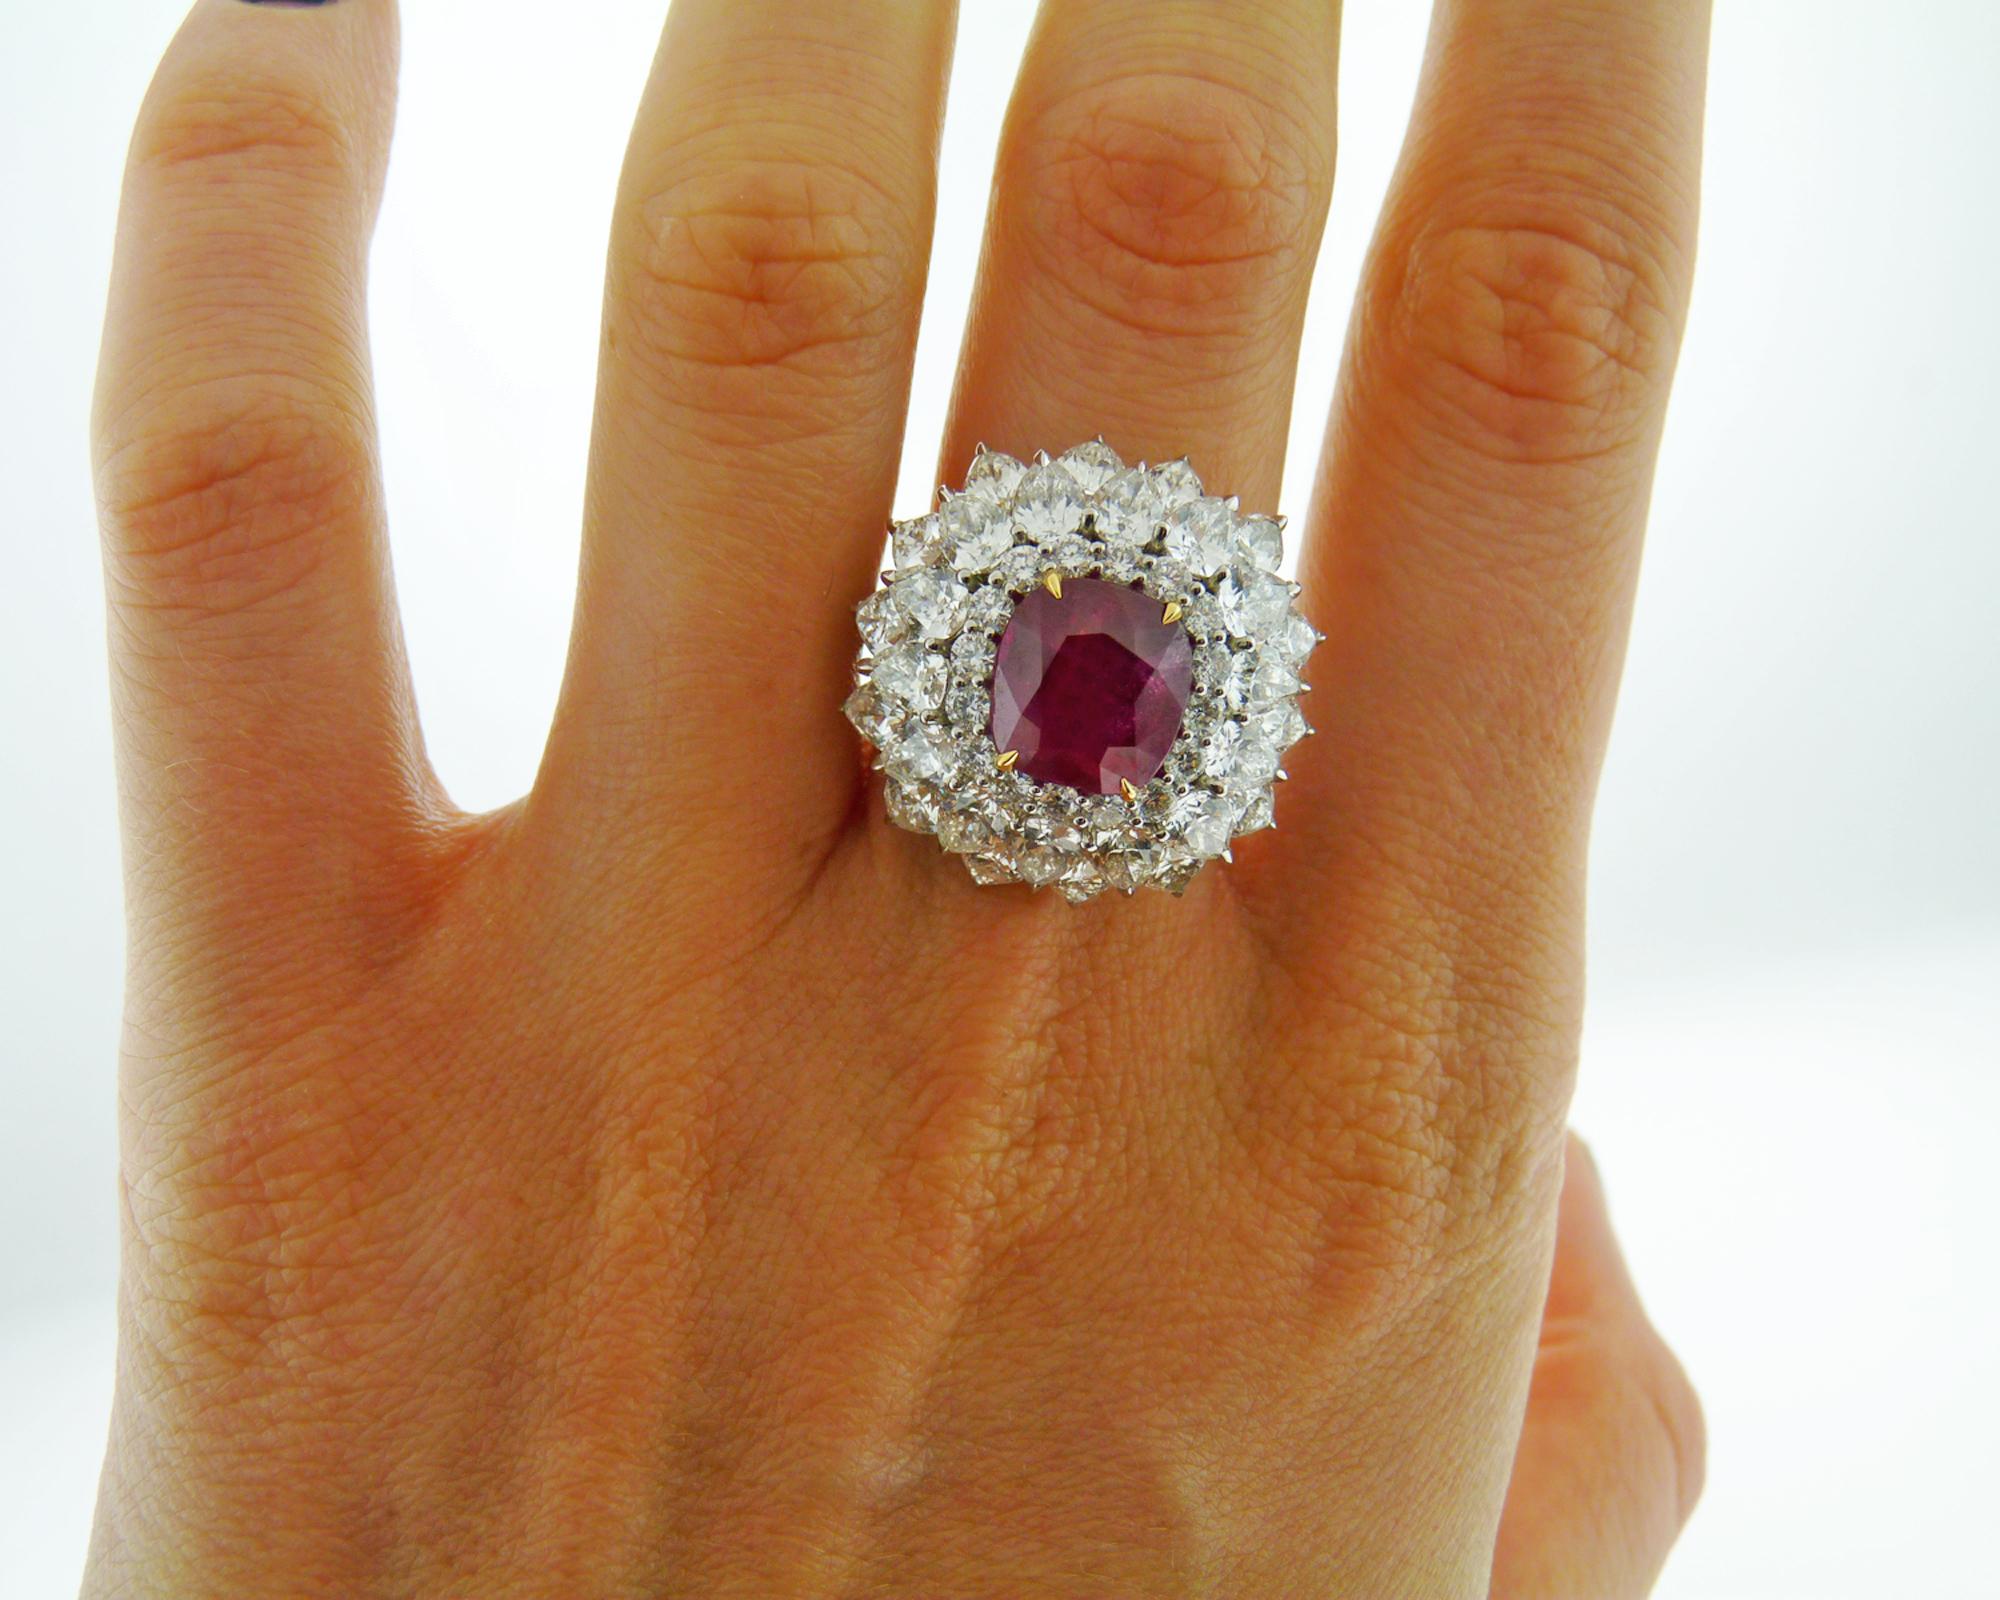 Spectra Fine Jewelry Certified 5.02 Carat Ruby Diamond Cocktail Ring In New Condition For Sale In New York, NY